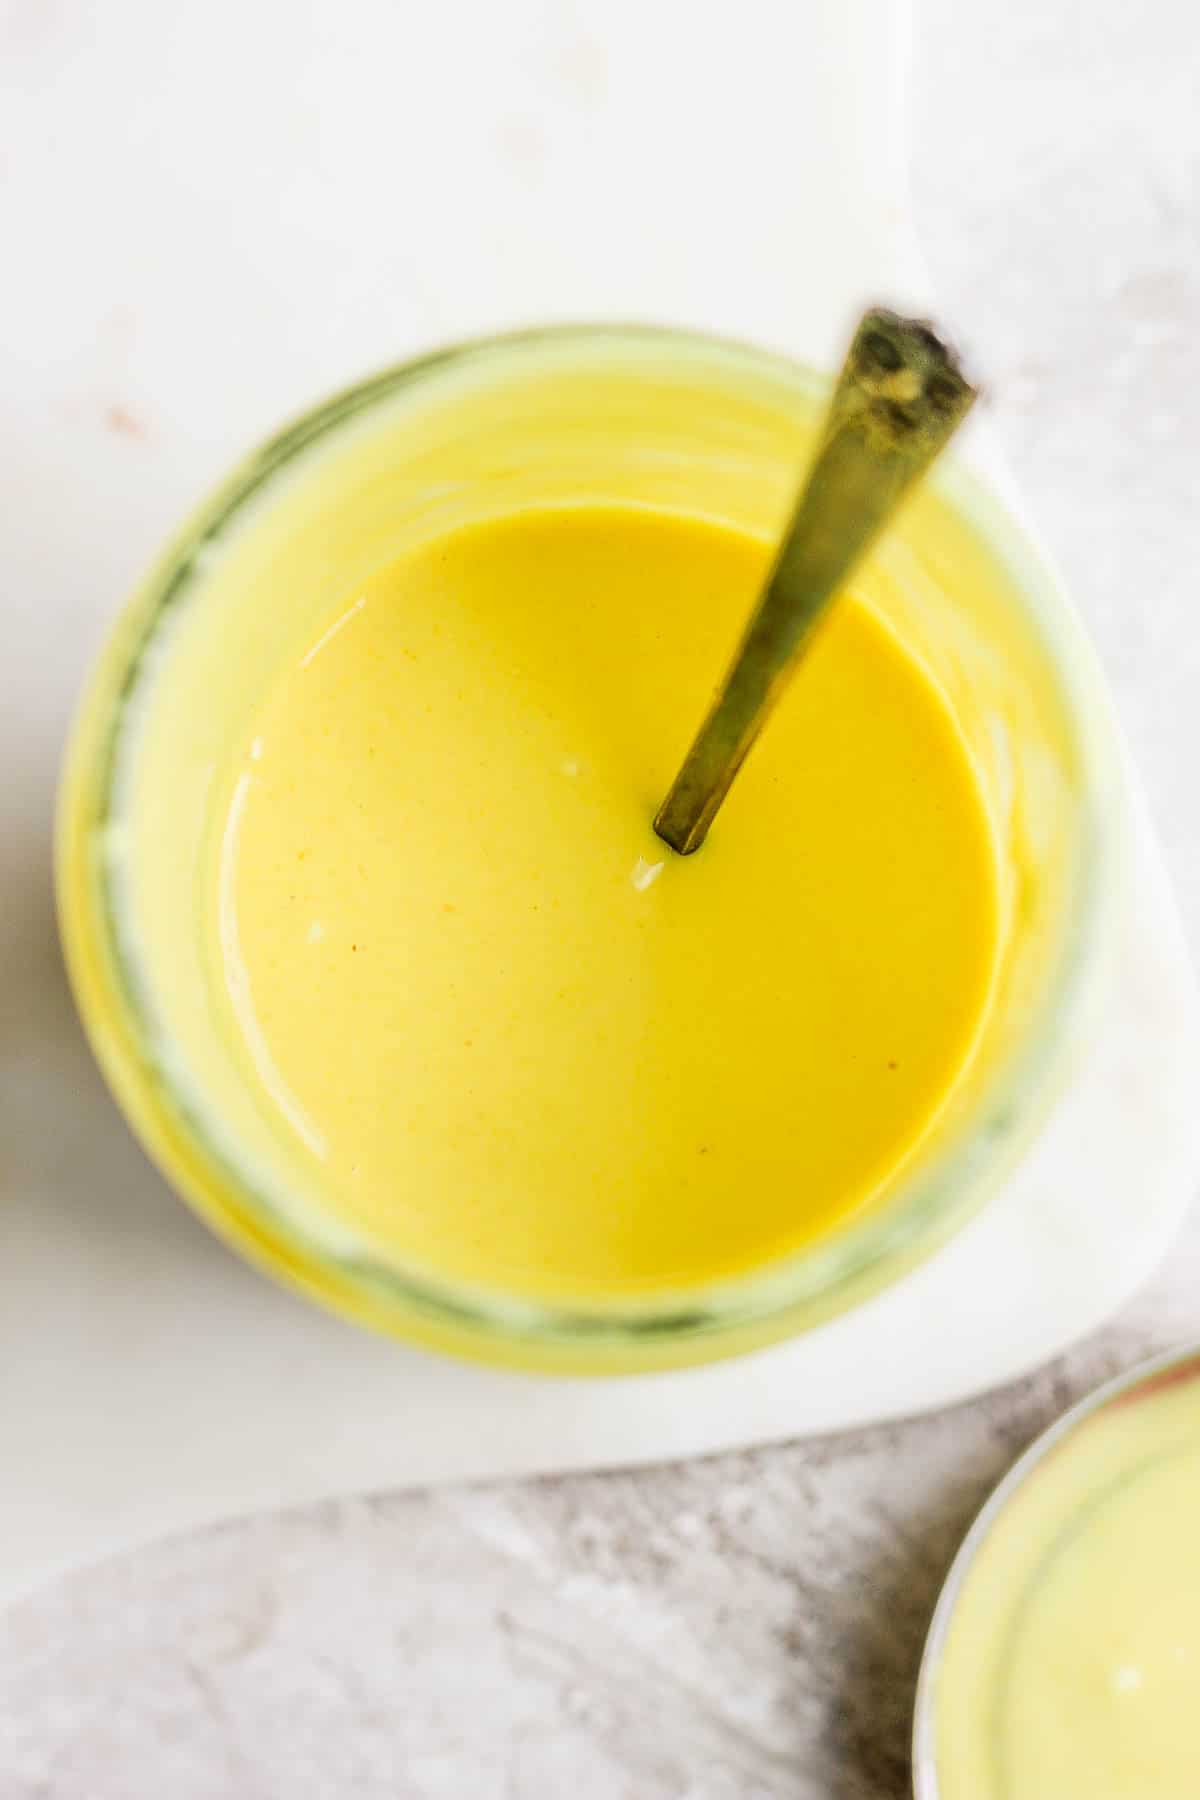 Honey mustard salad dressing in a jar with a spoon.